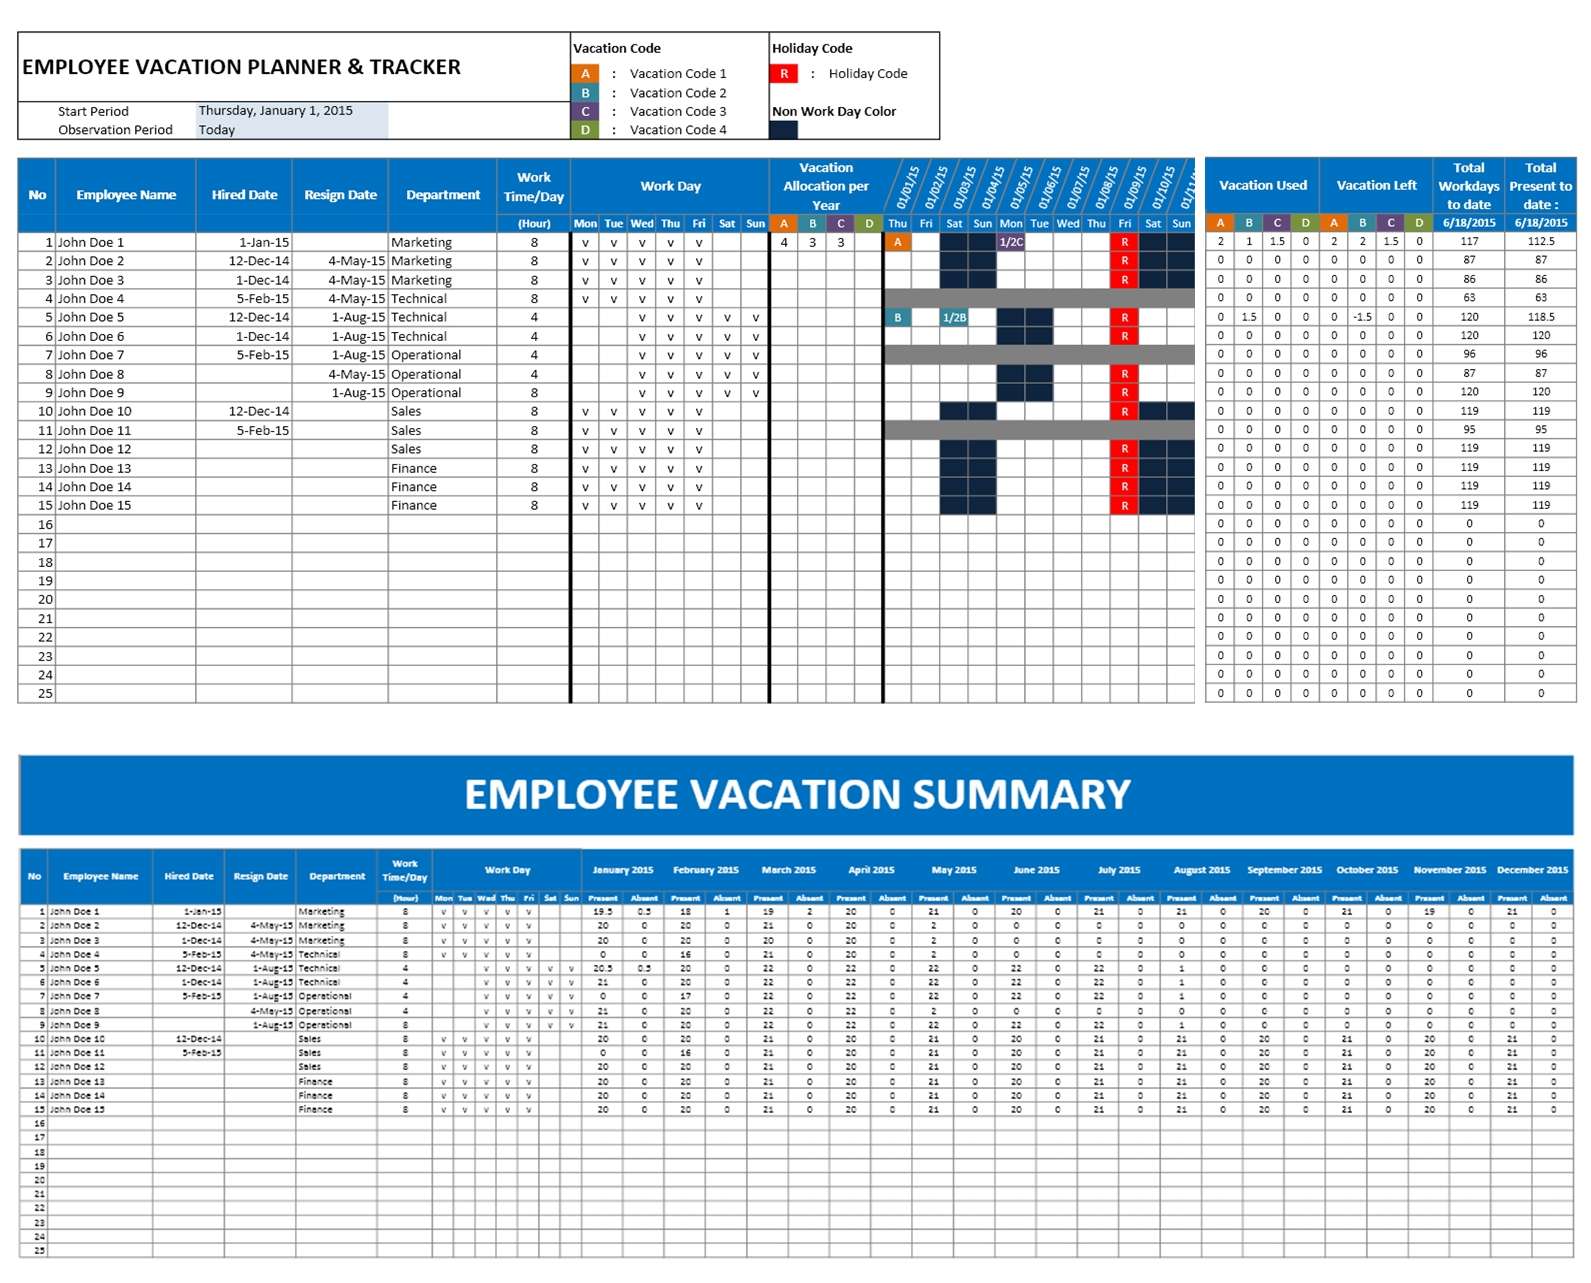 7 Best Images of Free Printable Vacation Calendar 2016 Employee 